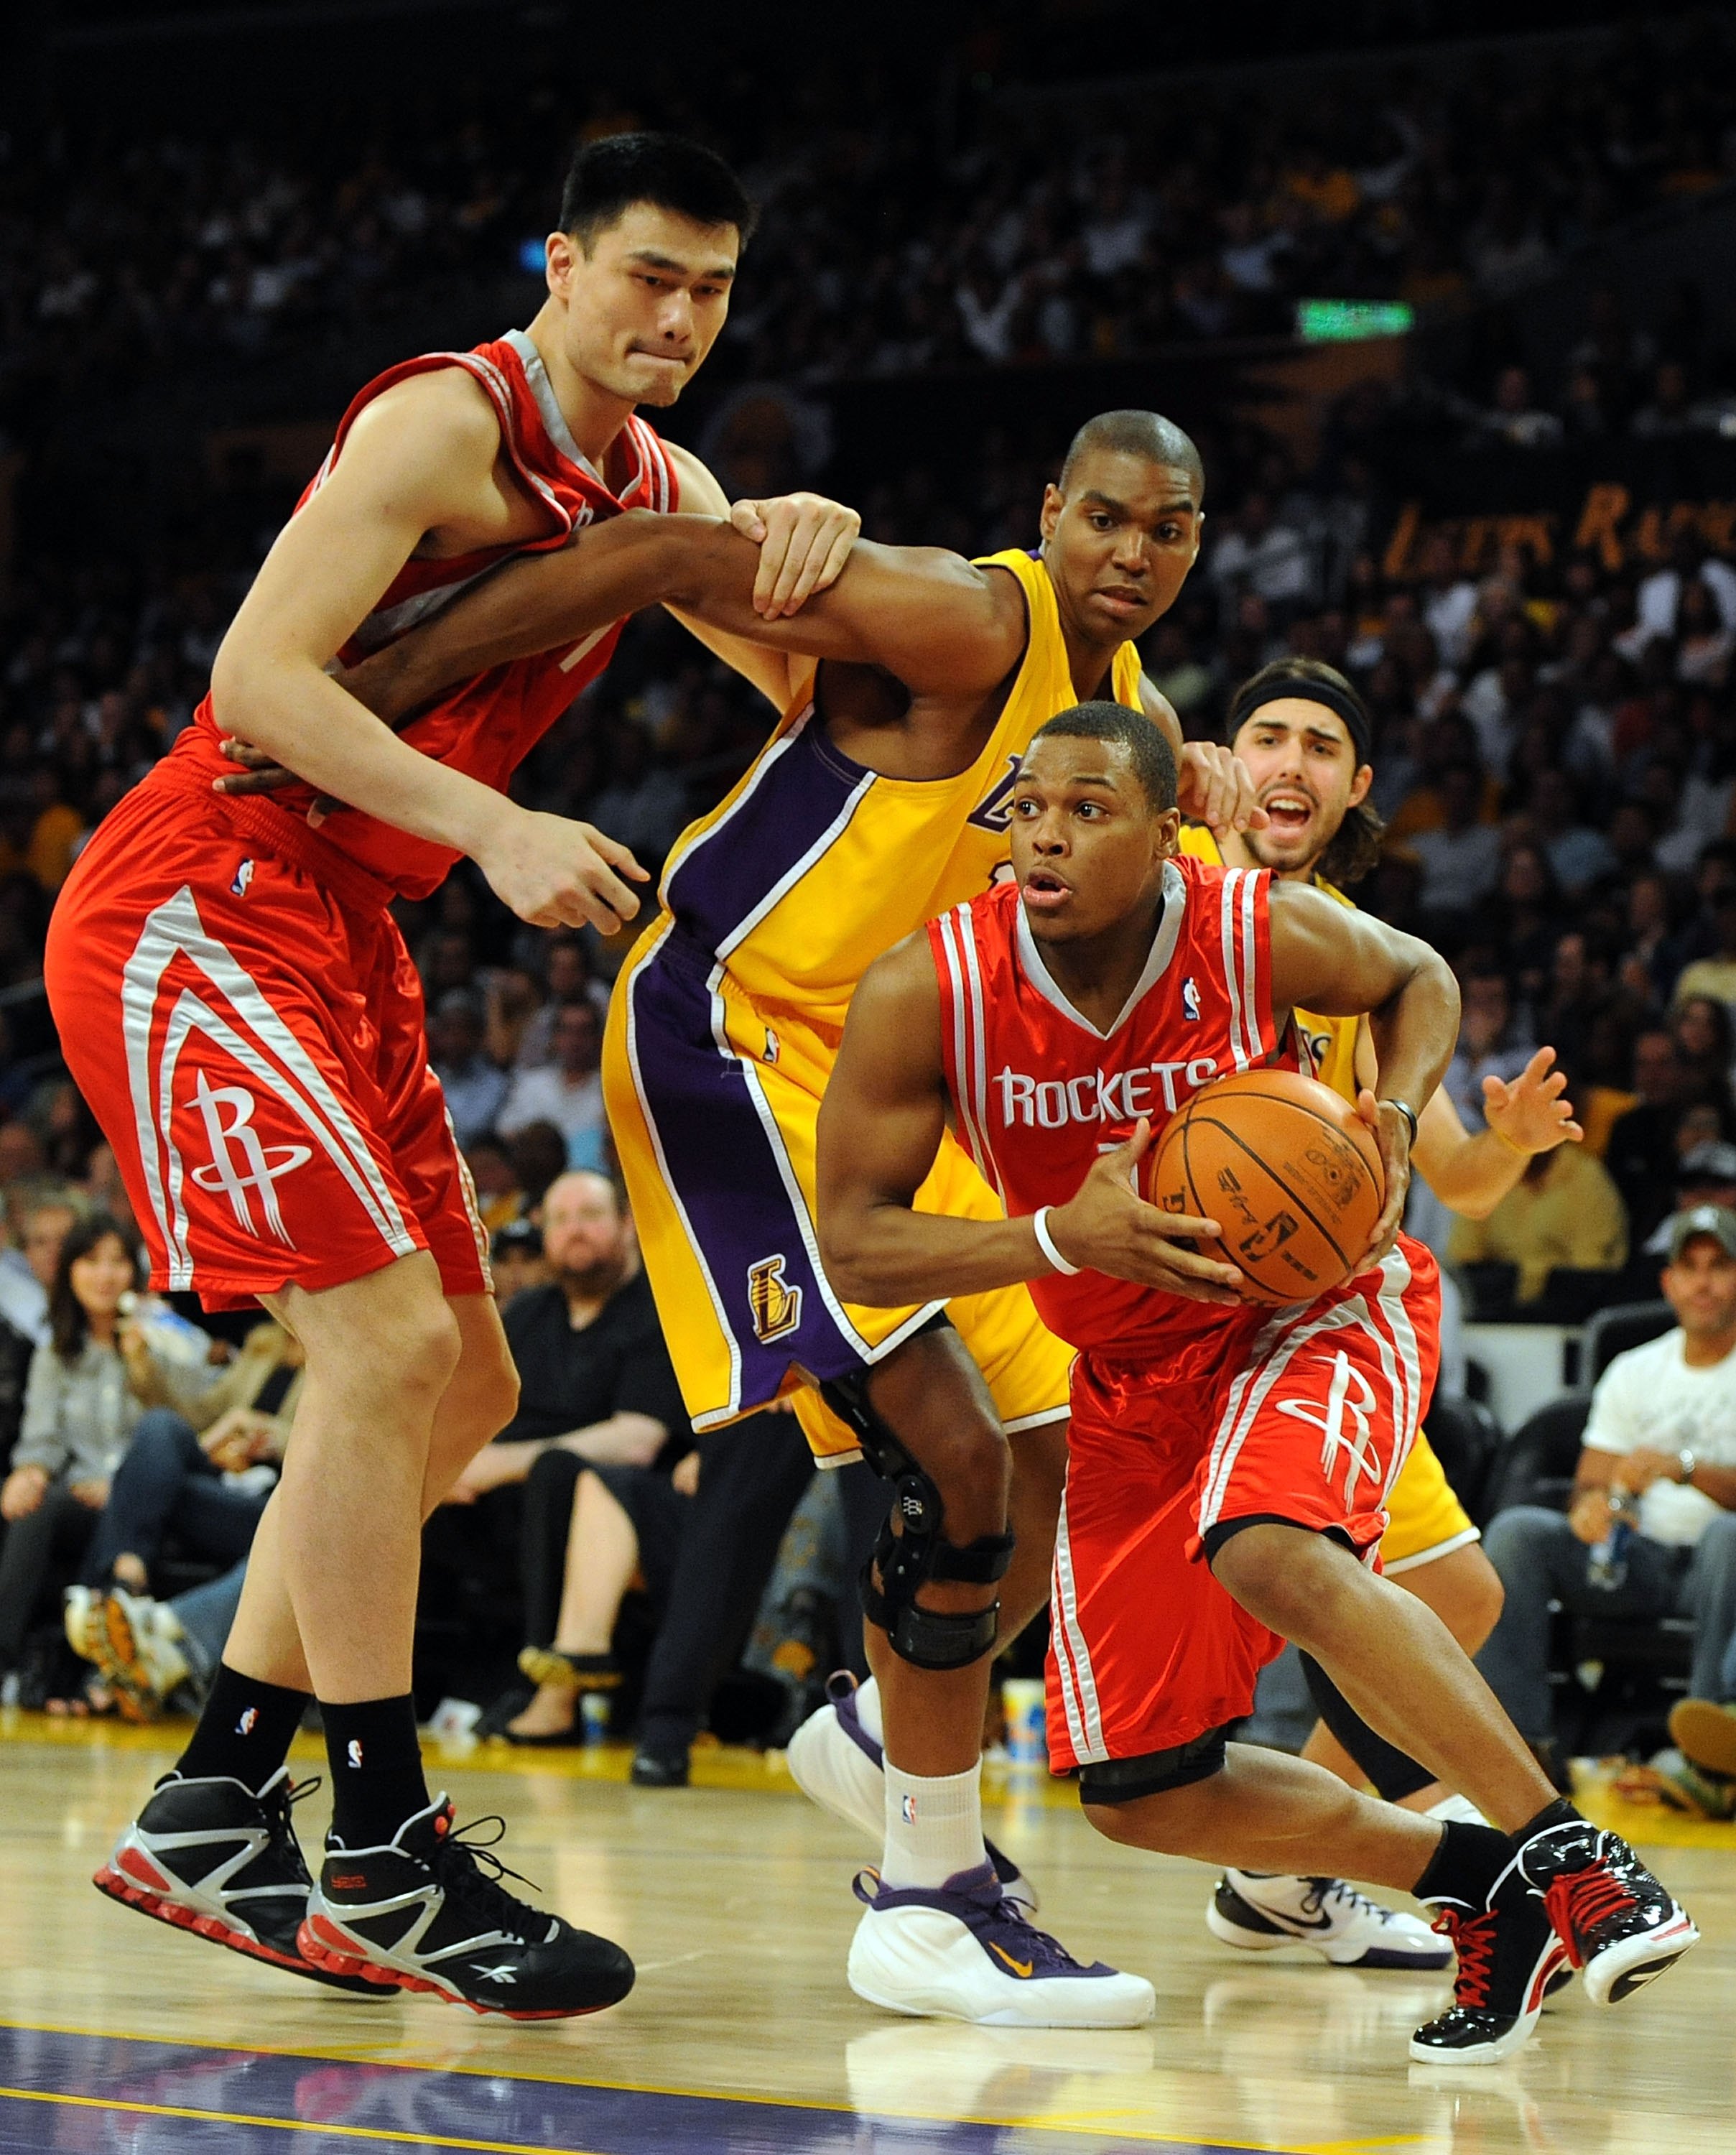 LOS ANGELES, CA - MAY 06:  Kyle Lowry #7 of the Houston Rockets drives by Sasha Vujacic #18 and Andrew Bynum #17 of the Los Angeles Lakers using a screen by Yao Ming #11 of the Rockets in Game Two of the Western Conference Semifinals during the 2009 NBA P